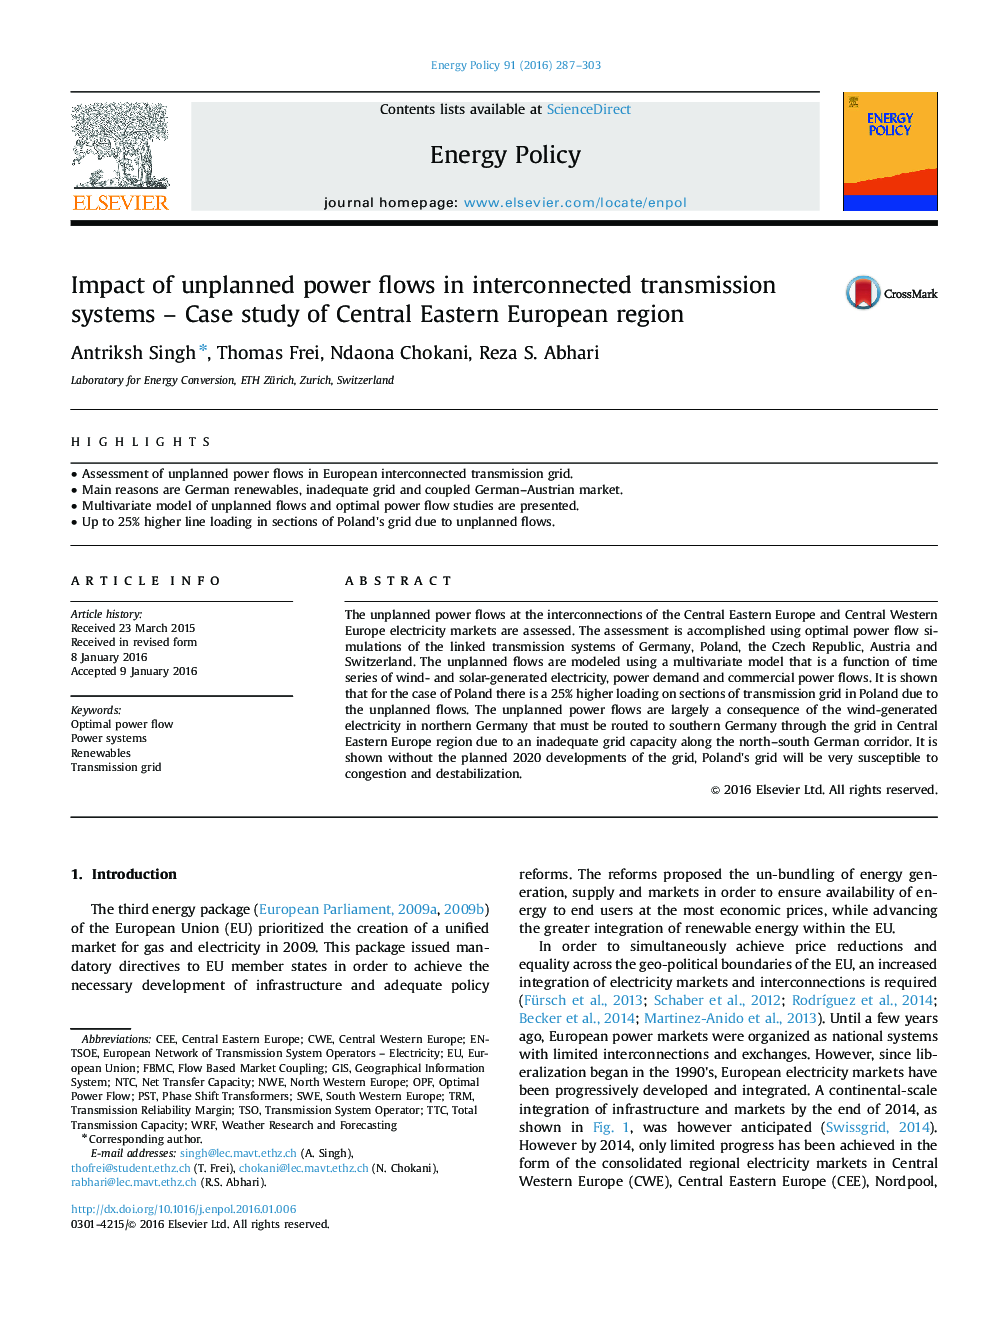 Impact of unplanned power flows in interconnected transmission systems - Case study of Central Eastern European region